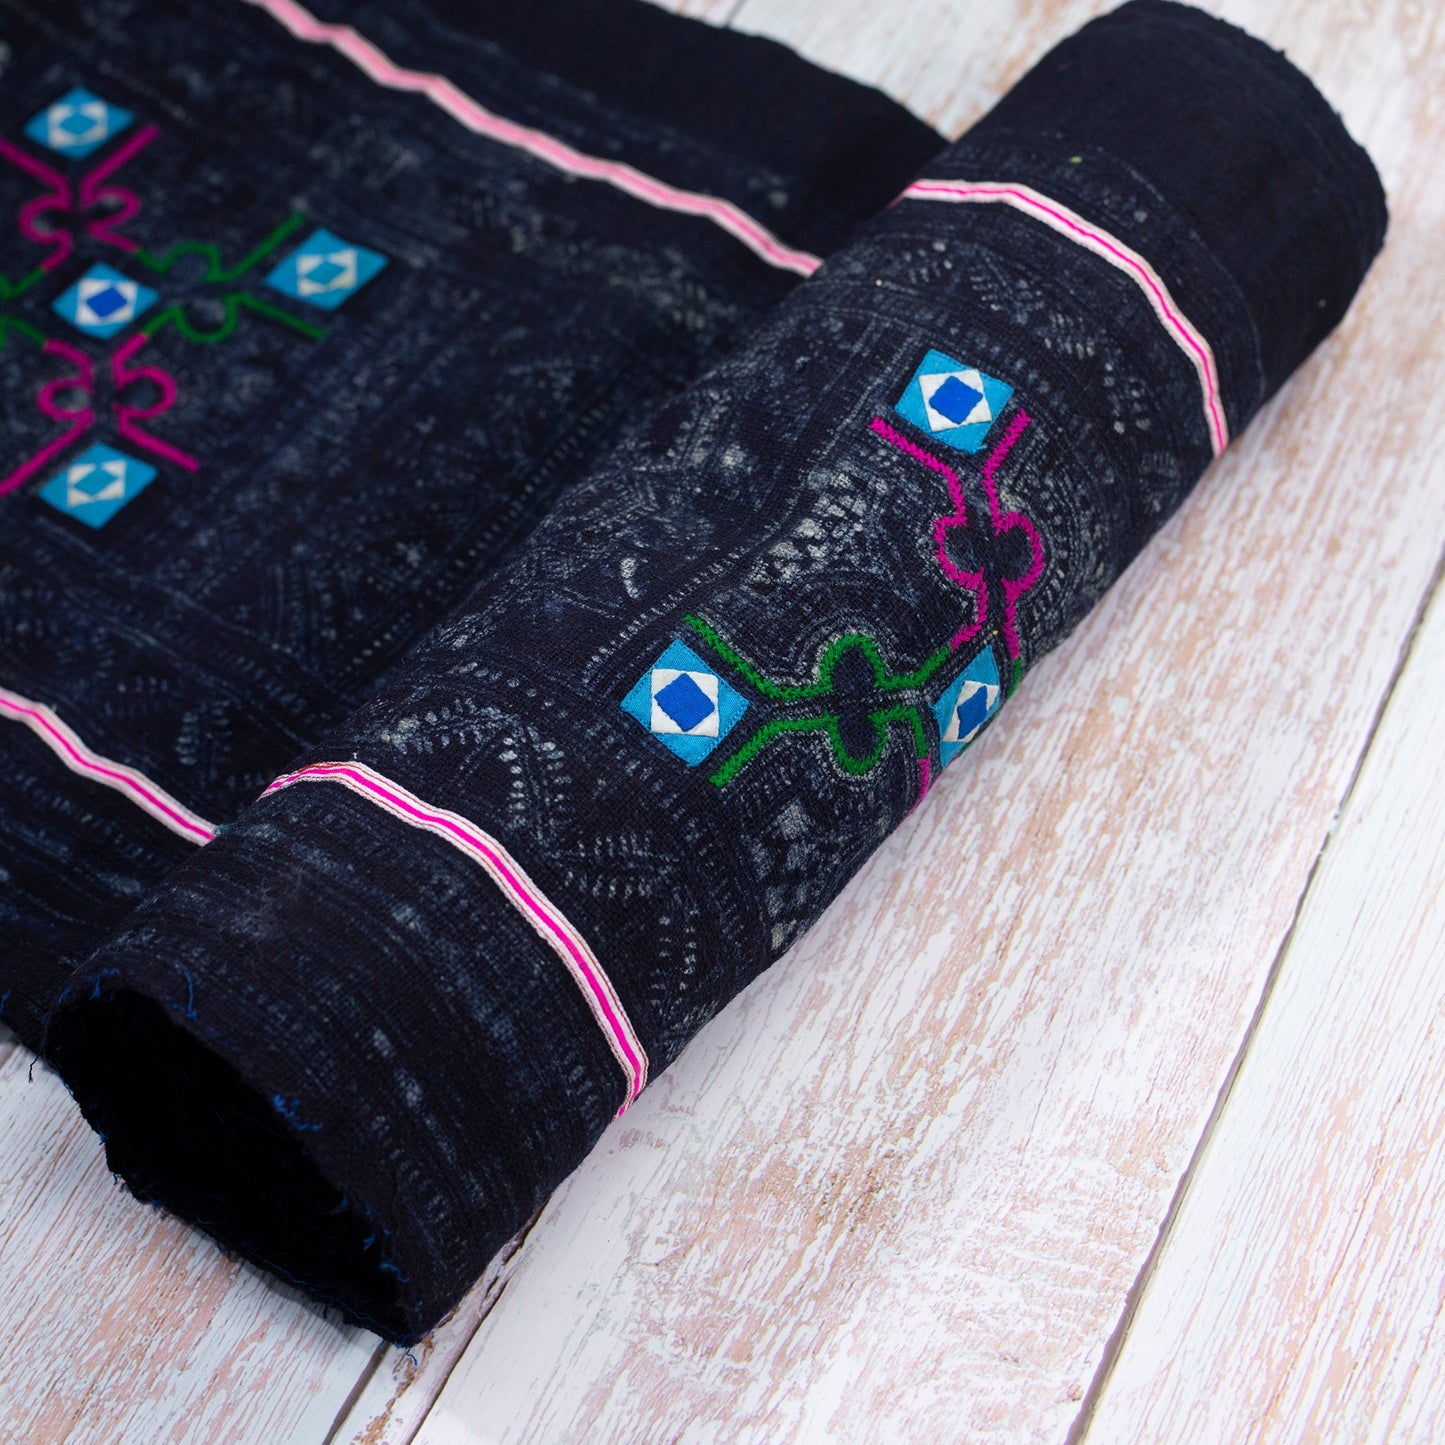 Authentic Vintage H'mong Hemp Textile – Indigo Batik with Hand-Drawn and Embroidered Details